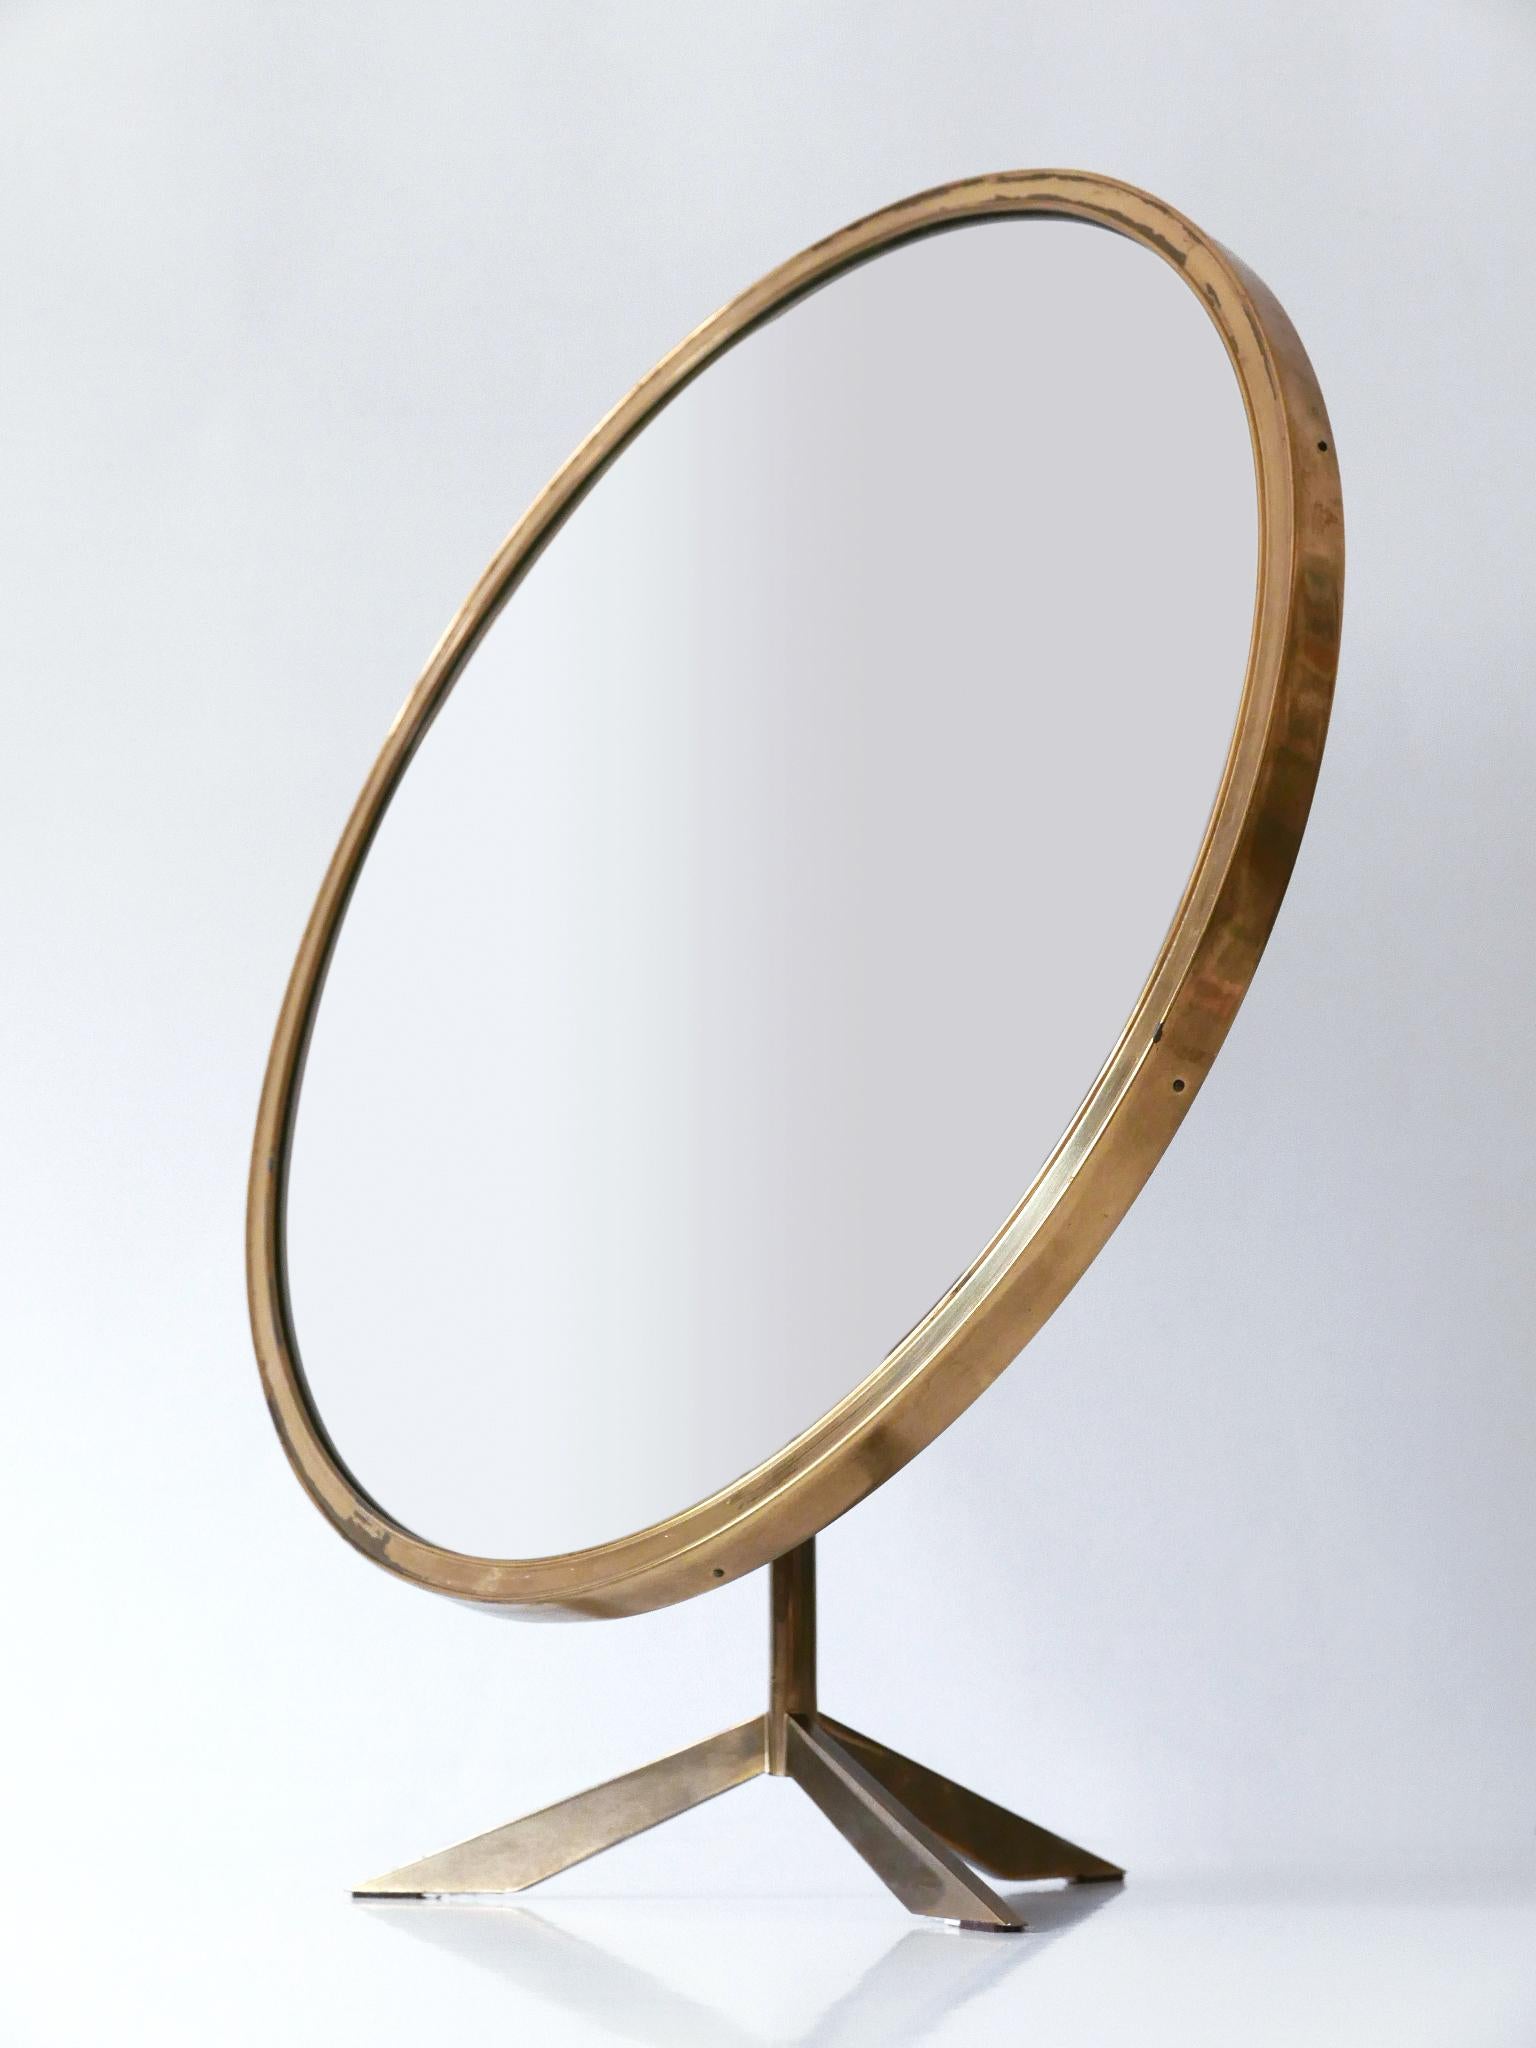 Elegant Mid-Century Modern Wall or Vanity Mirror by Zierform Germany 1950s For Sale 4